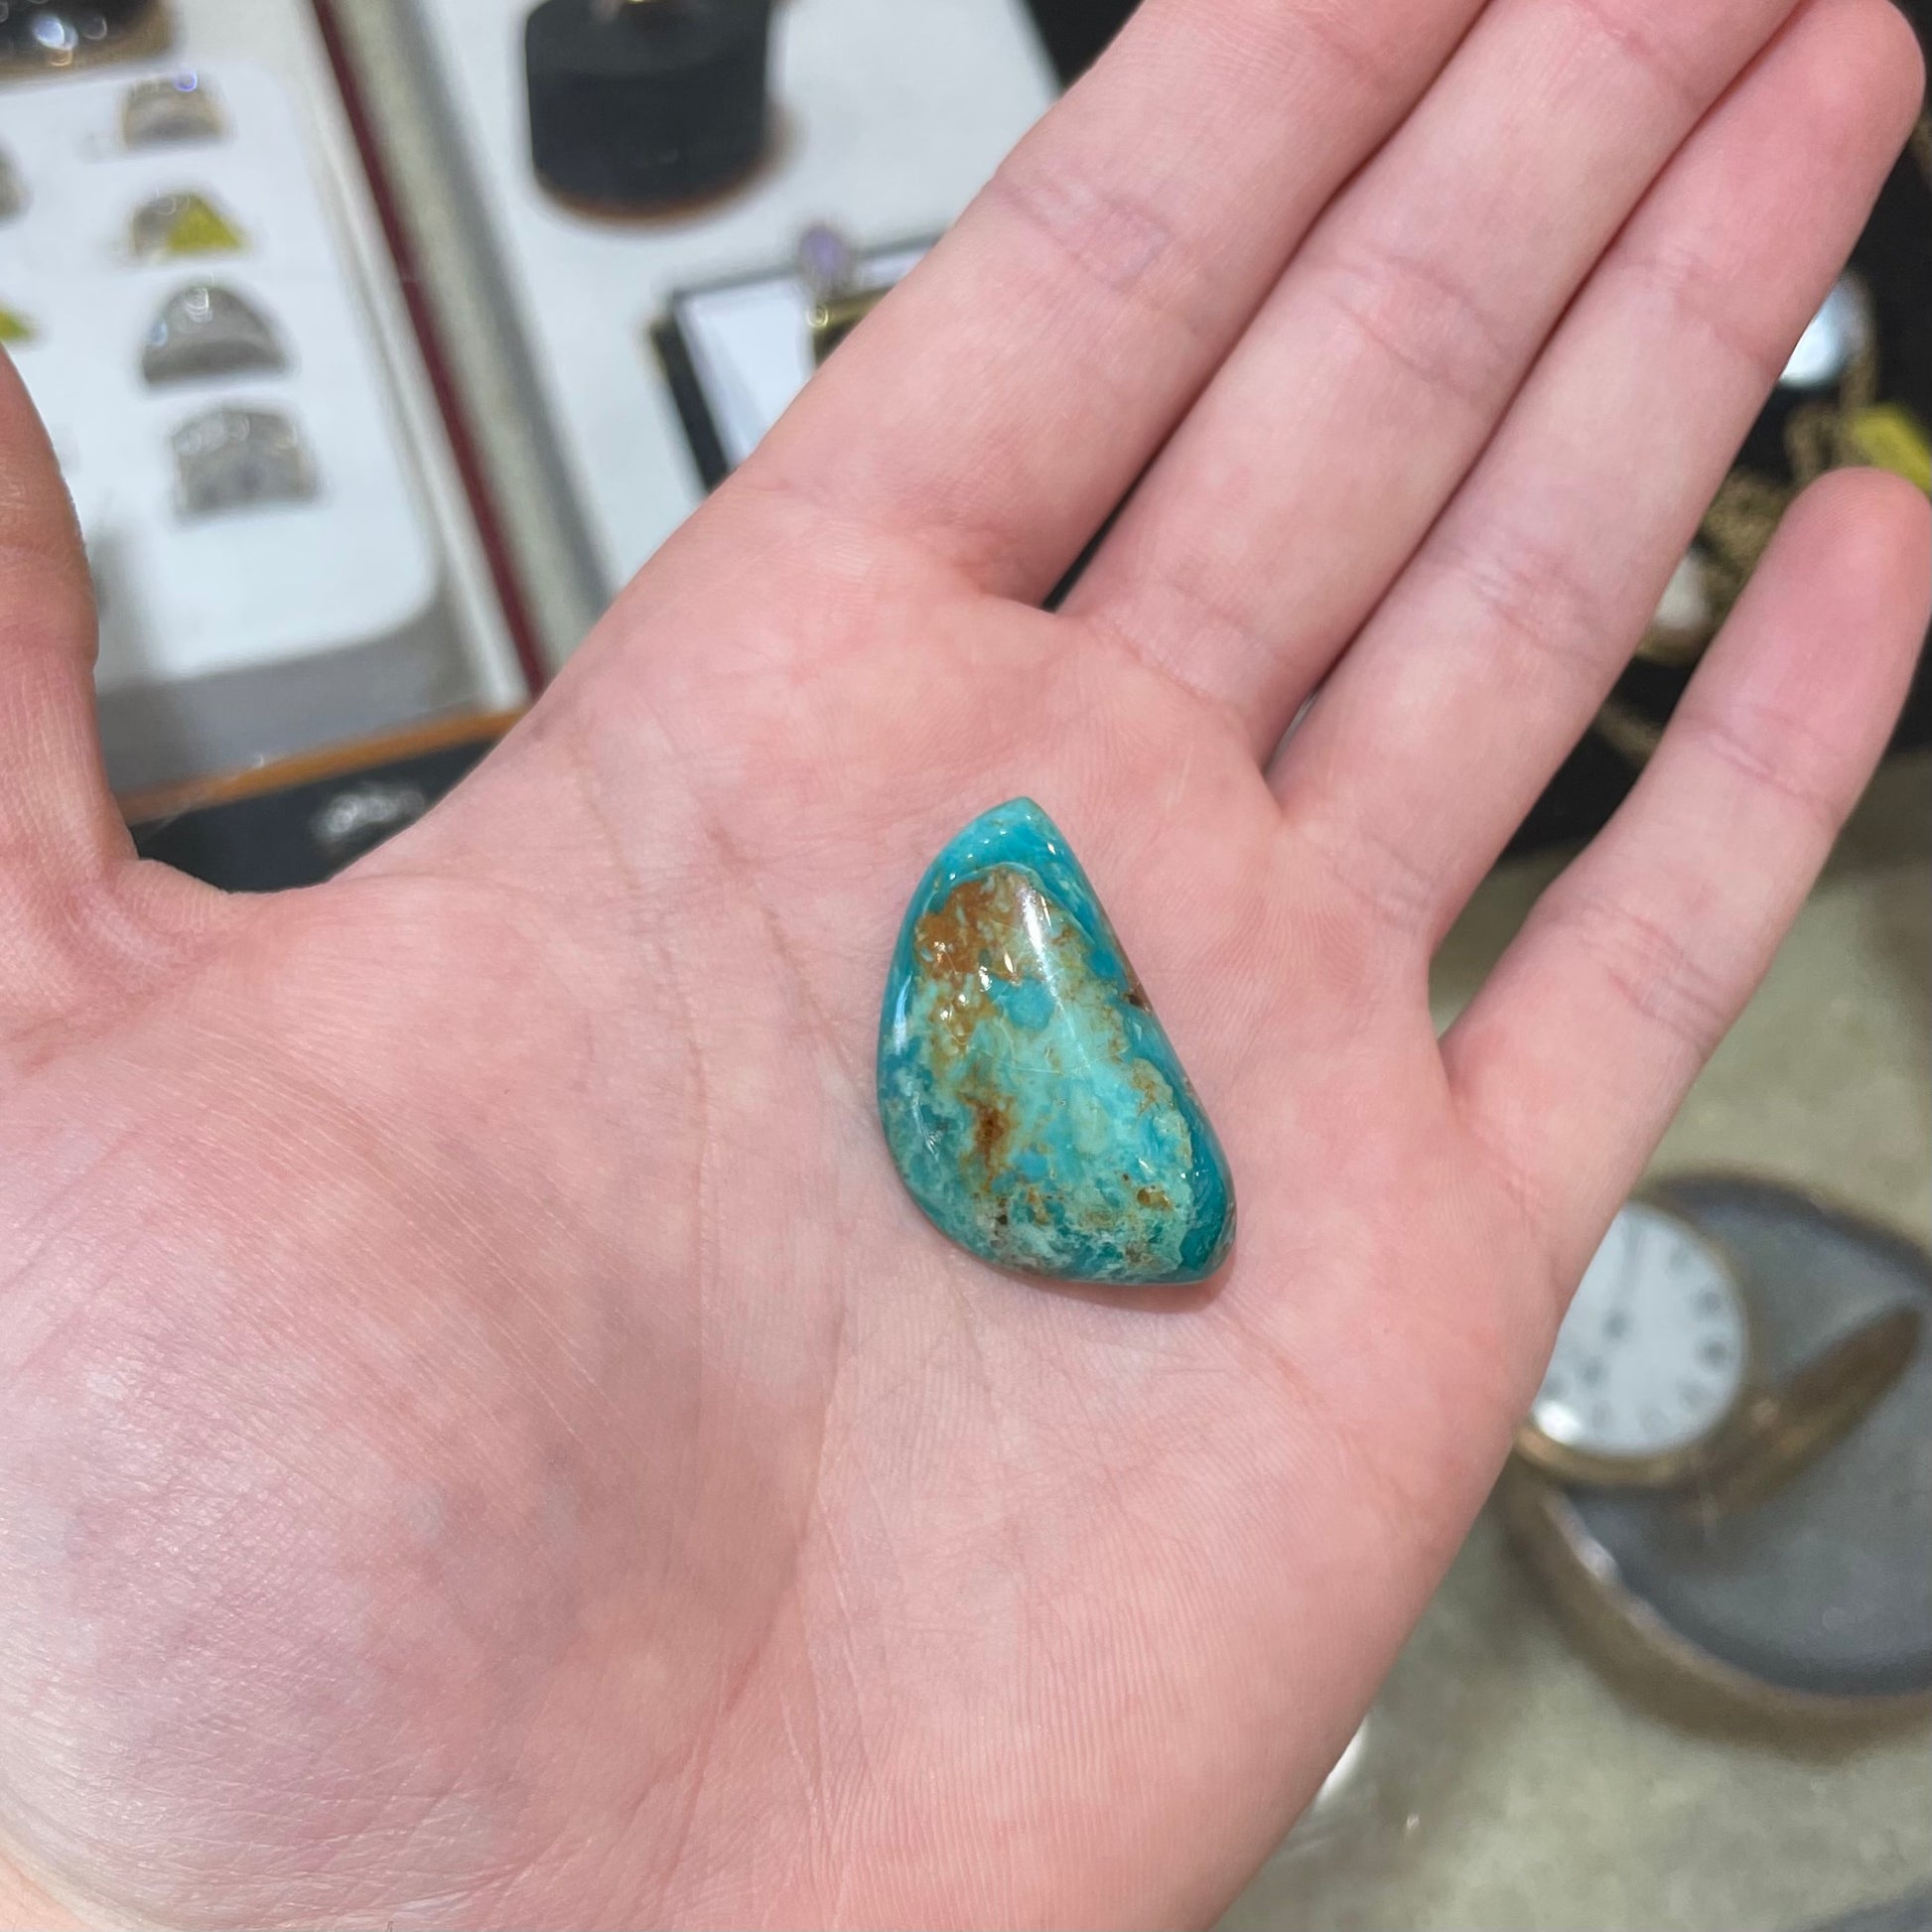 A loose freeform cut turquoise stone from the Royston Mining District in Nevada.